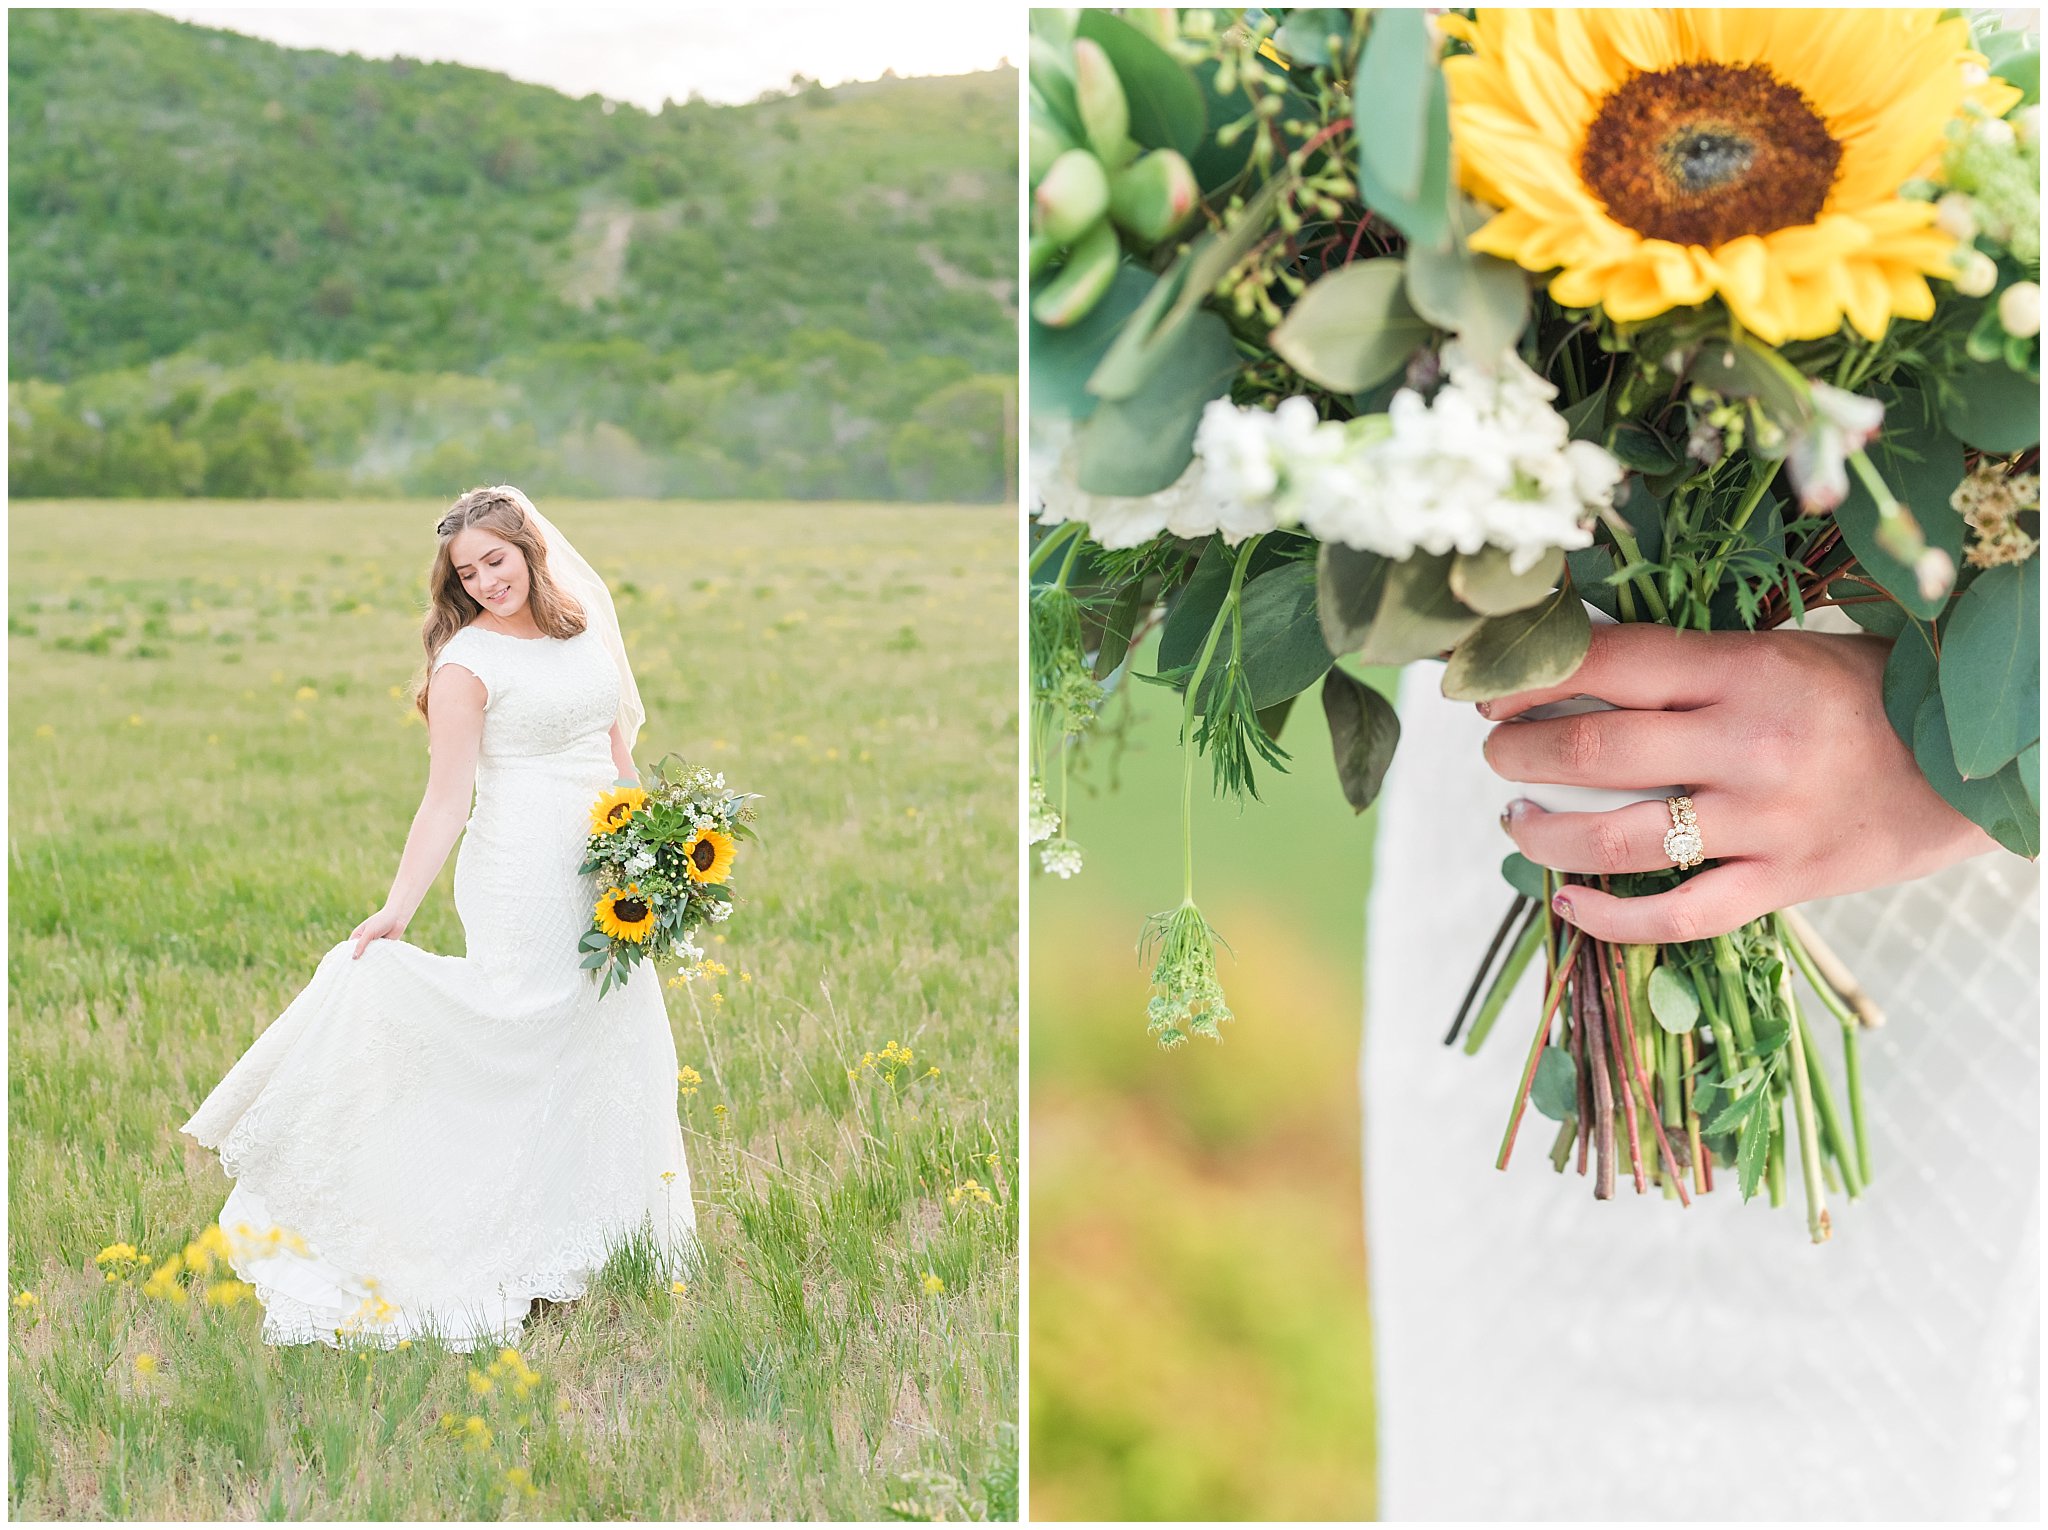 Bride with sunflower and succulent bouquet in a grassy field in the mountains | Brigham City Temple and Mantua Mountain Formal Session | Jessie and Dallin Photography